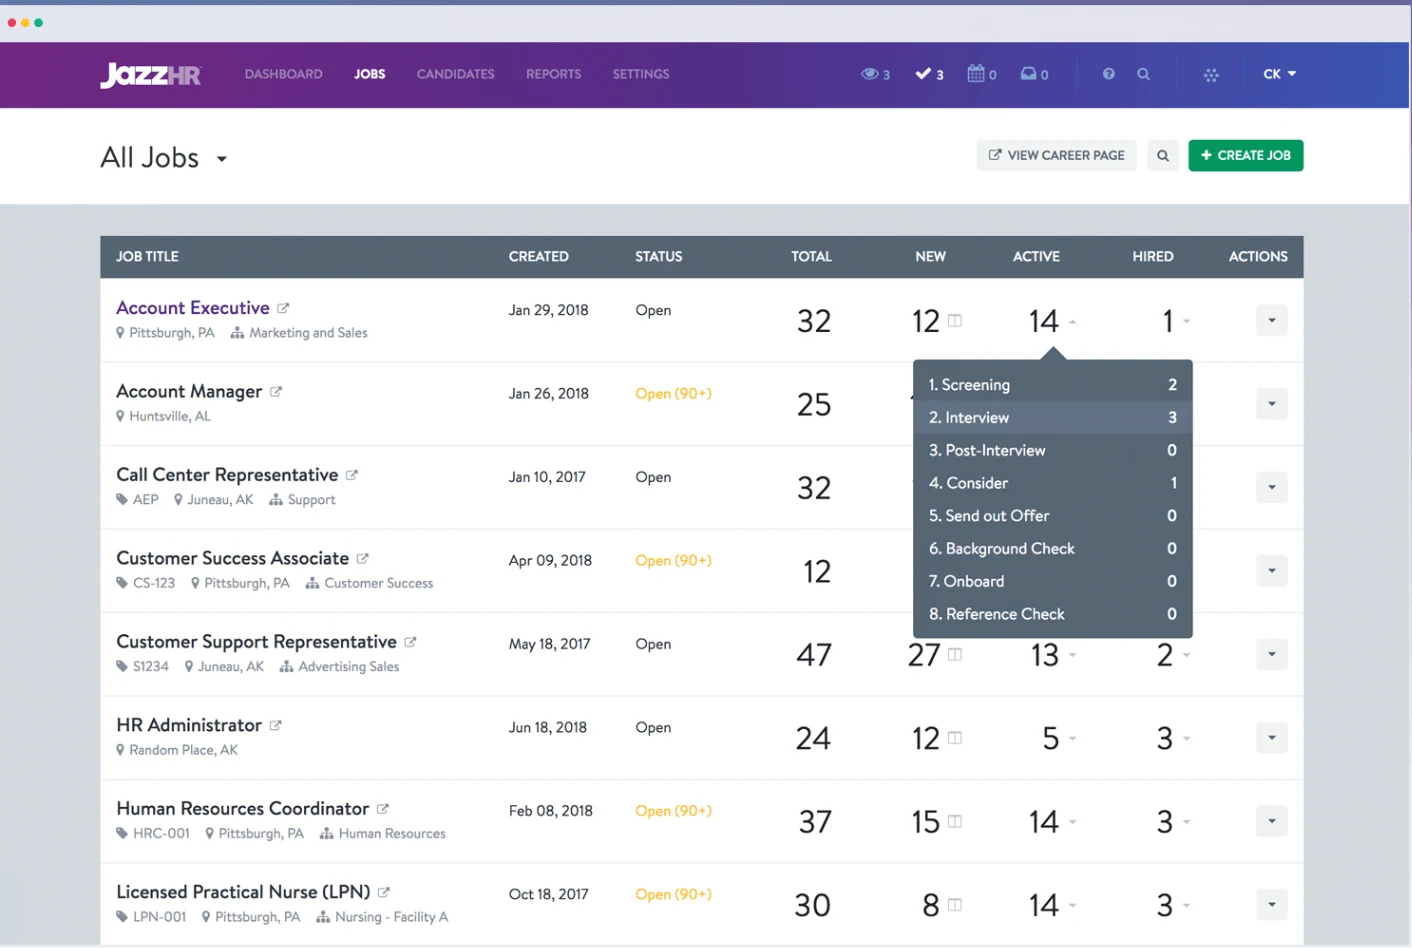 JazzHR lets recruitment teams manage multiple openings from a single dashboard. Image via JazzHR